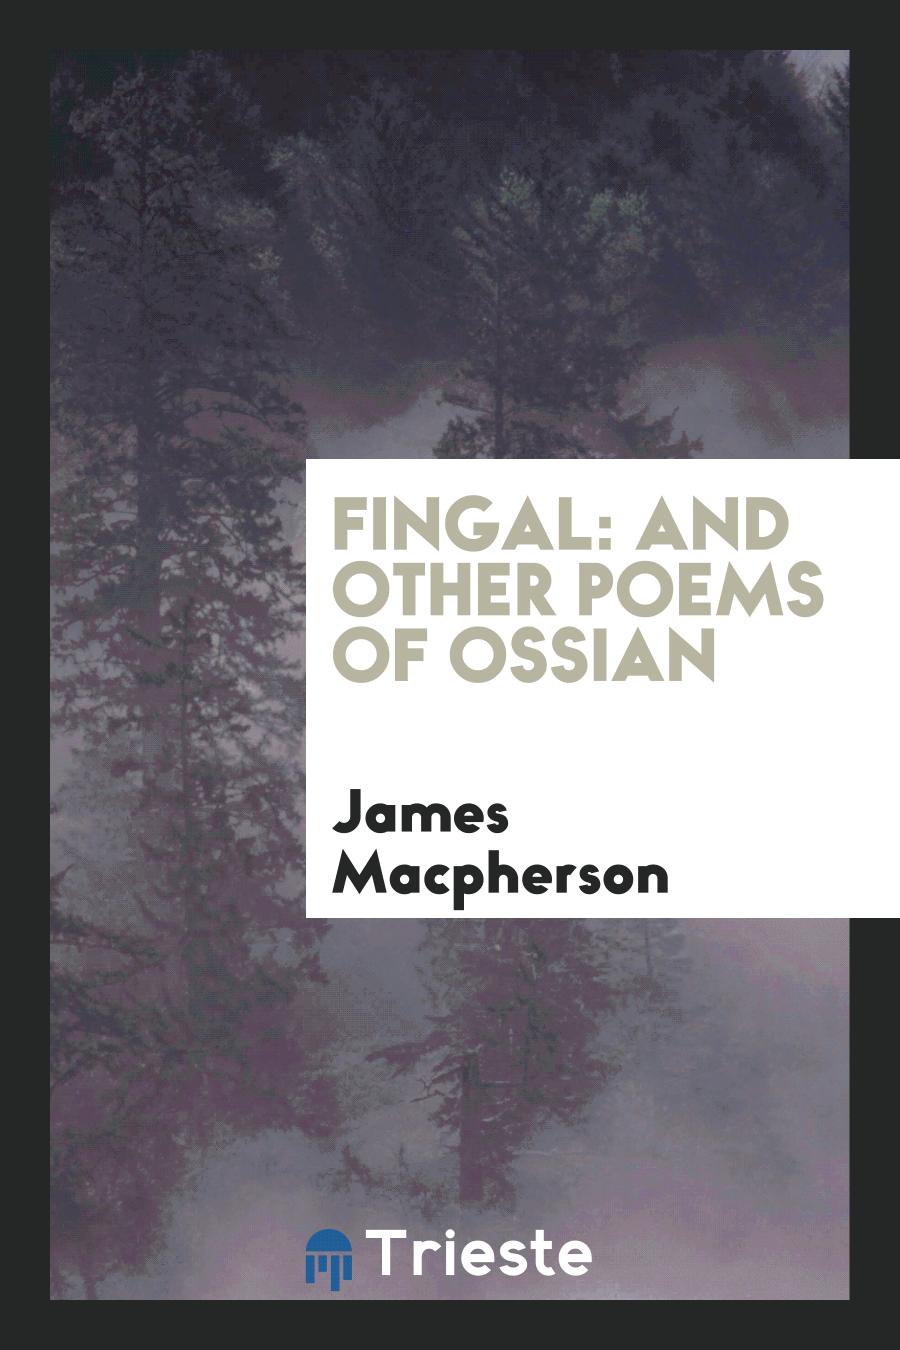 Fingal: and other poems of Ossian